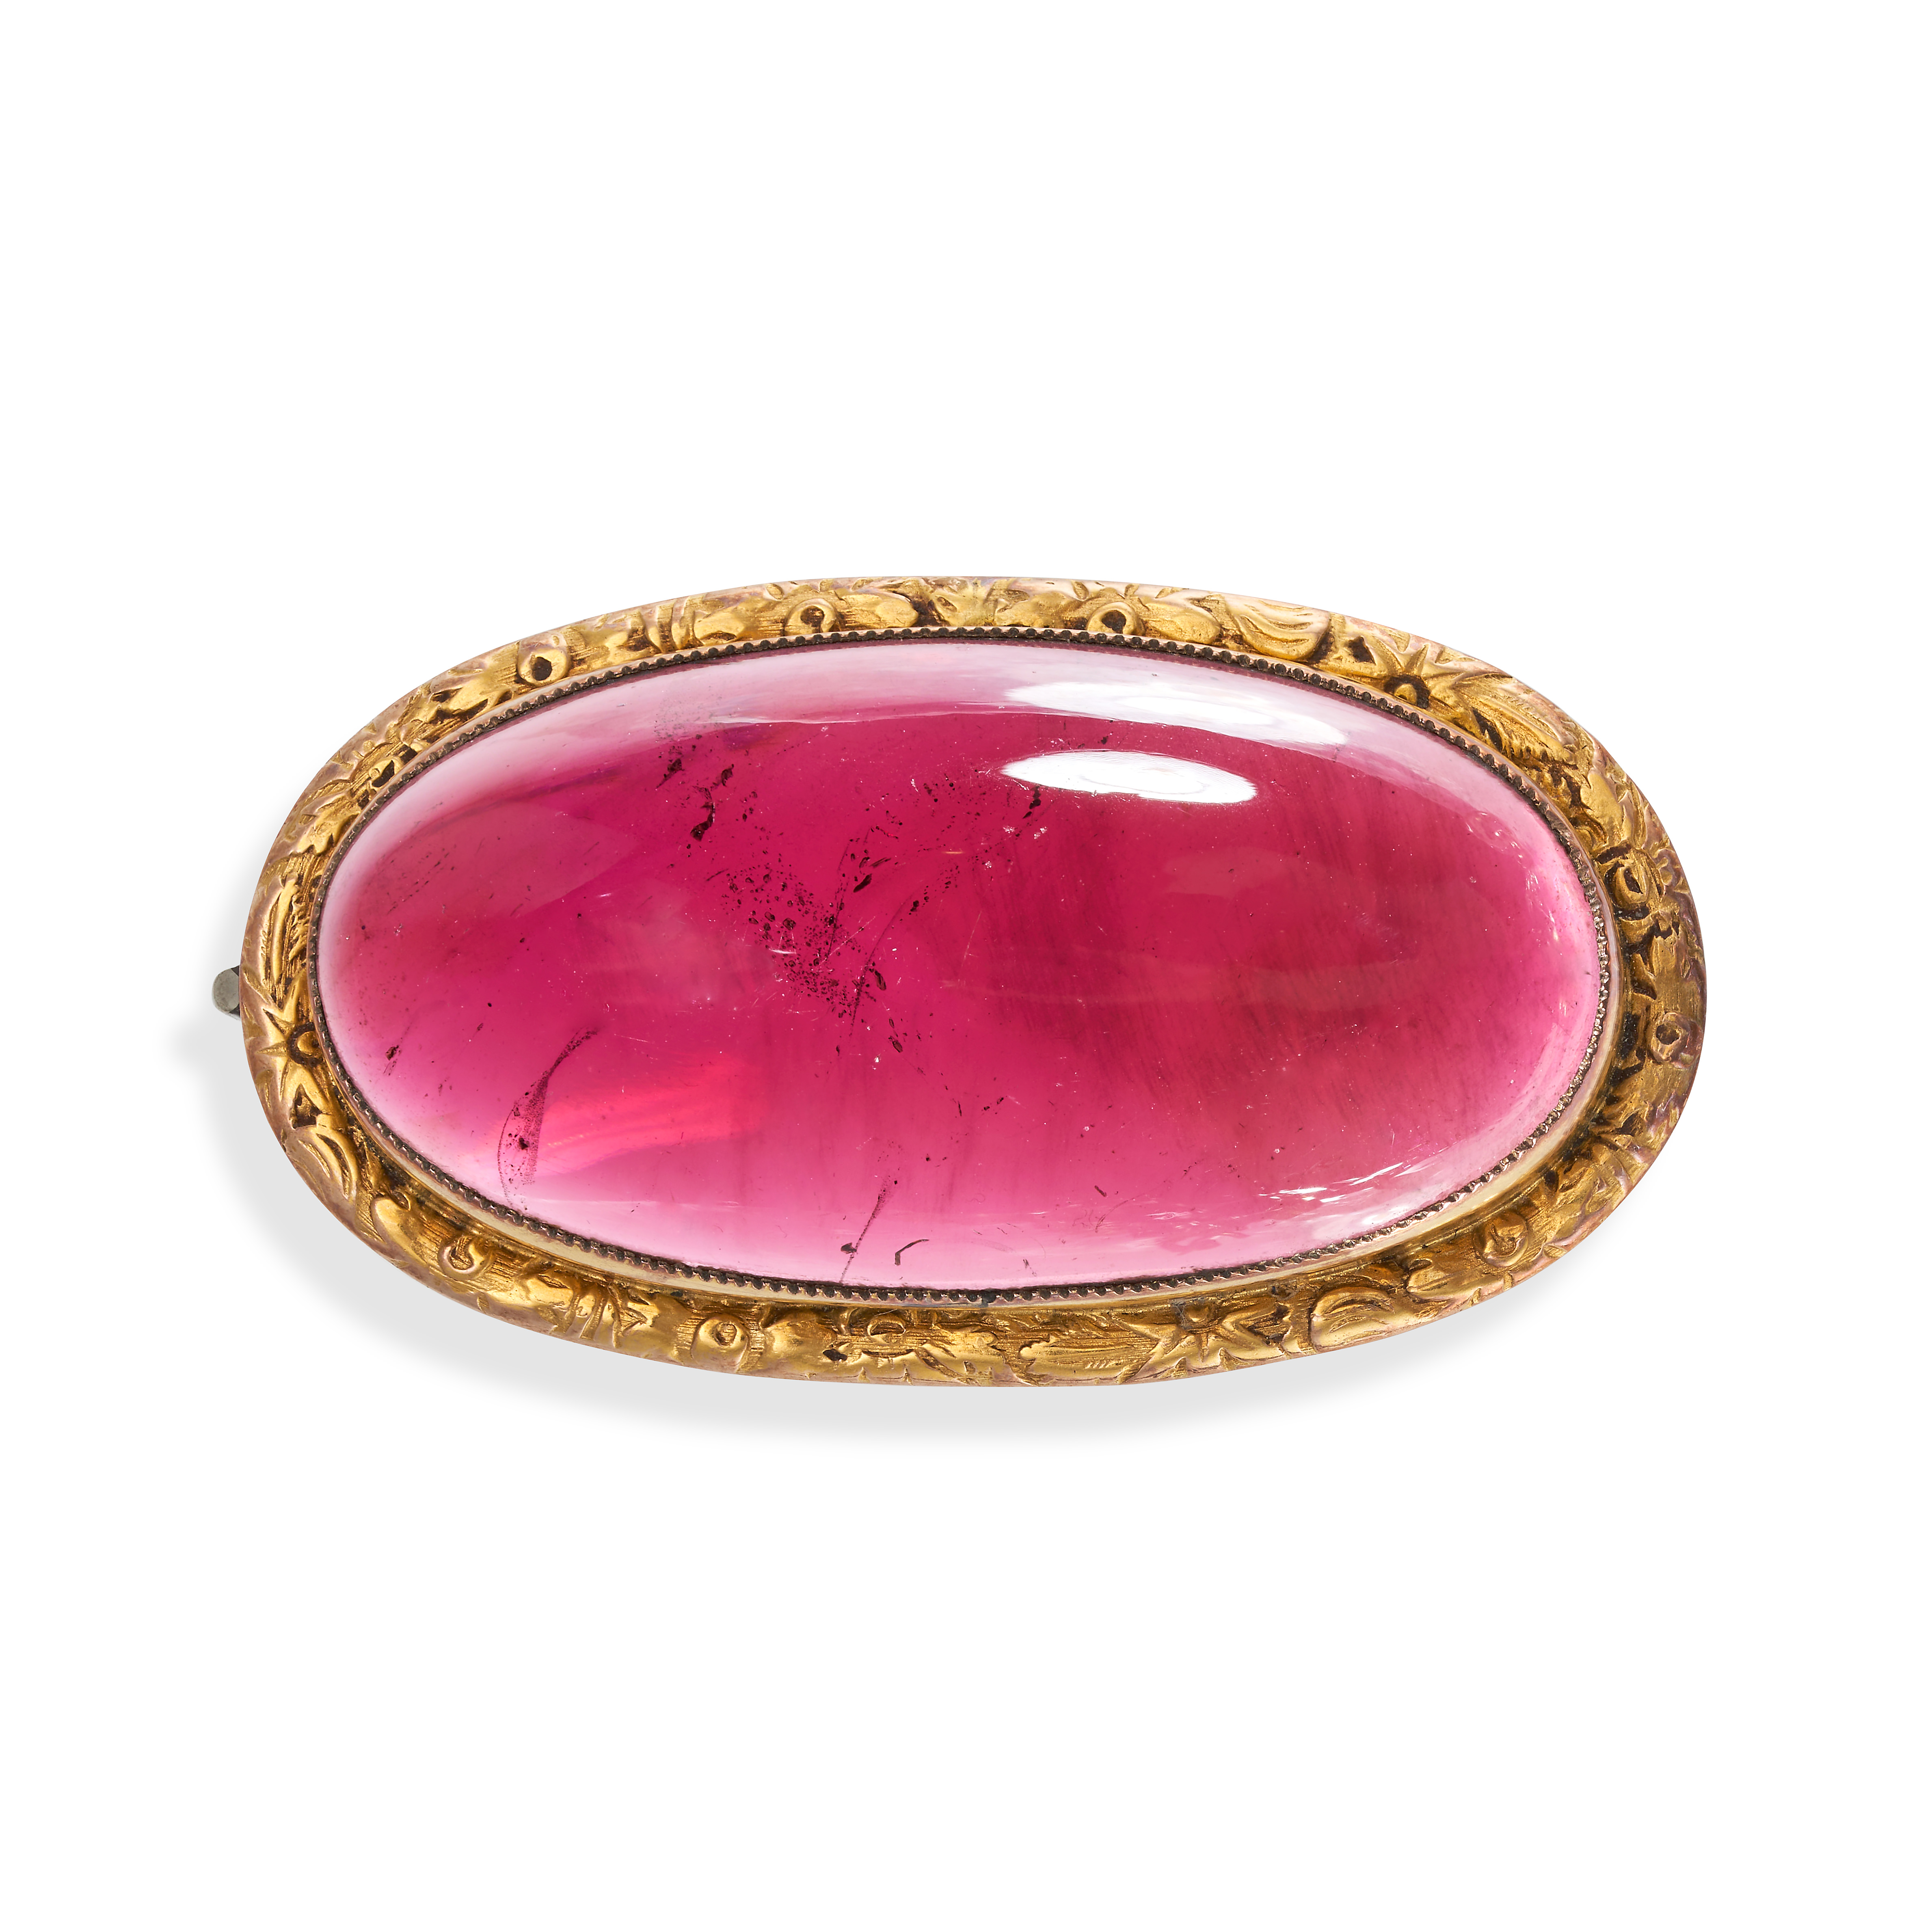 AN ANTIQUE GARNET BROOCH in yellow gold, set with a carbuncle cabochon garnet in an engraved bord...